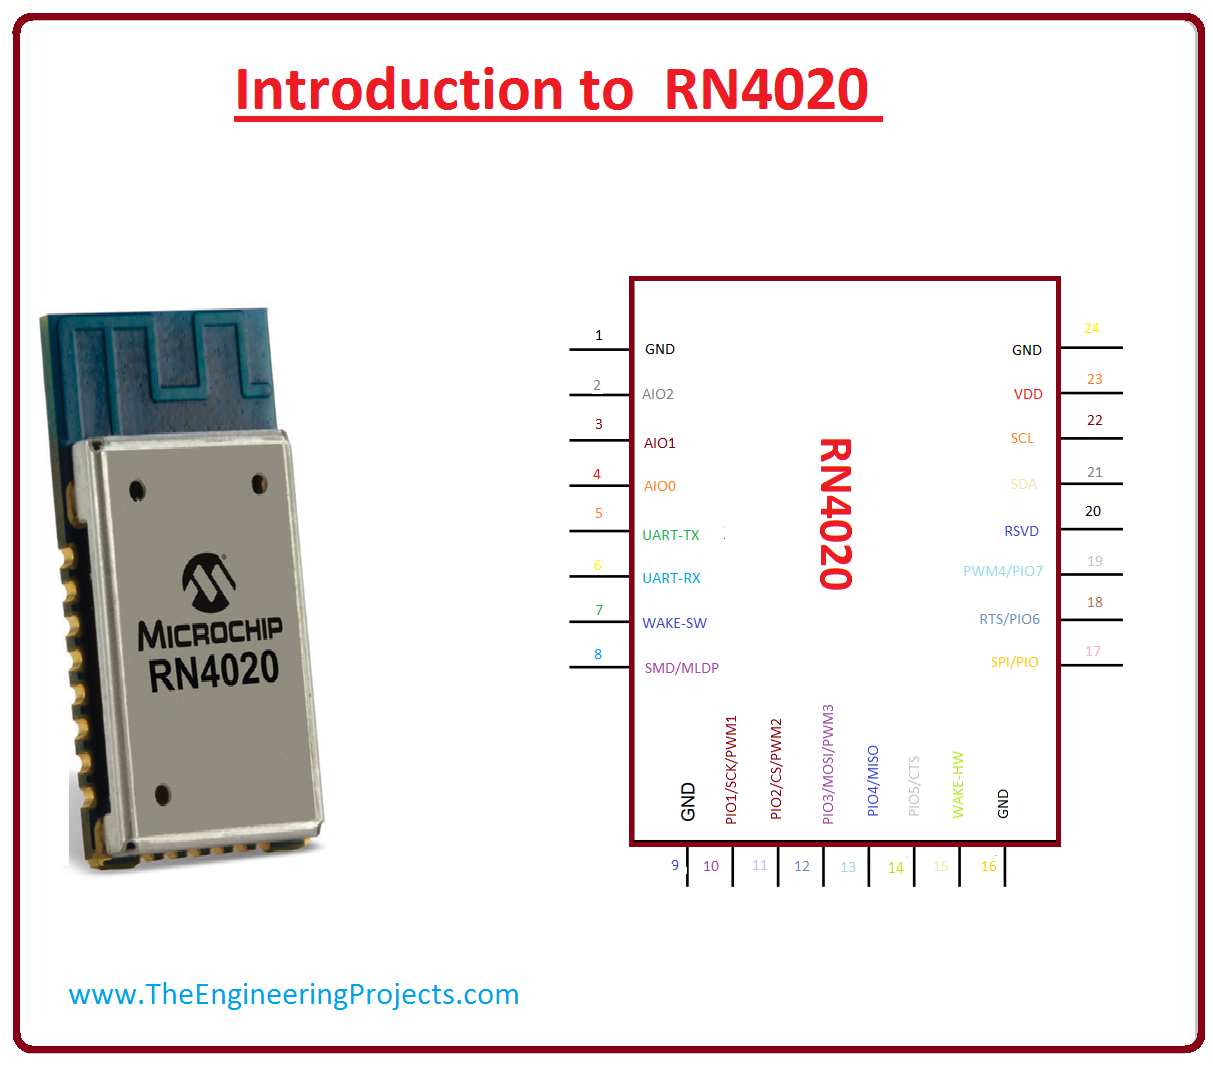 introduction to rn4020, rn4020 pinout,rn4020 working, rn4020 features, rn4020 applications, rn4020